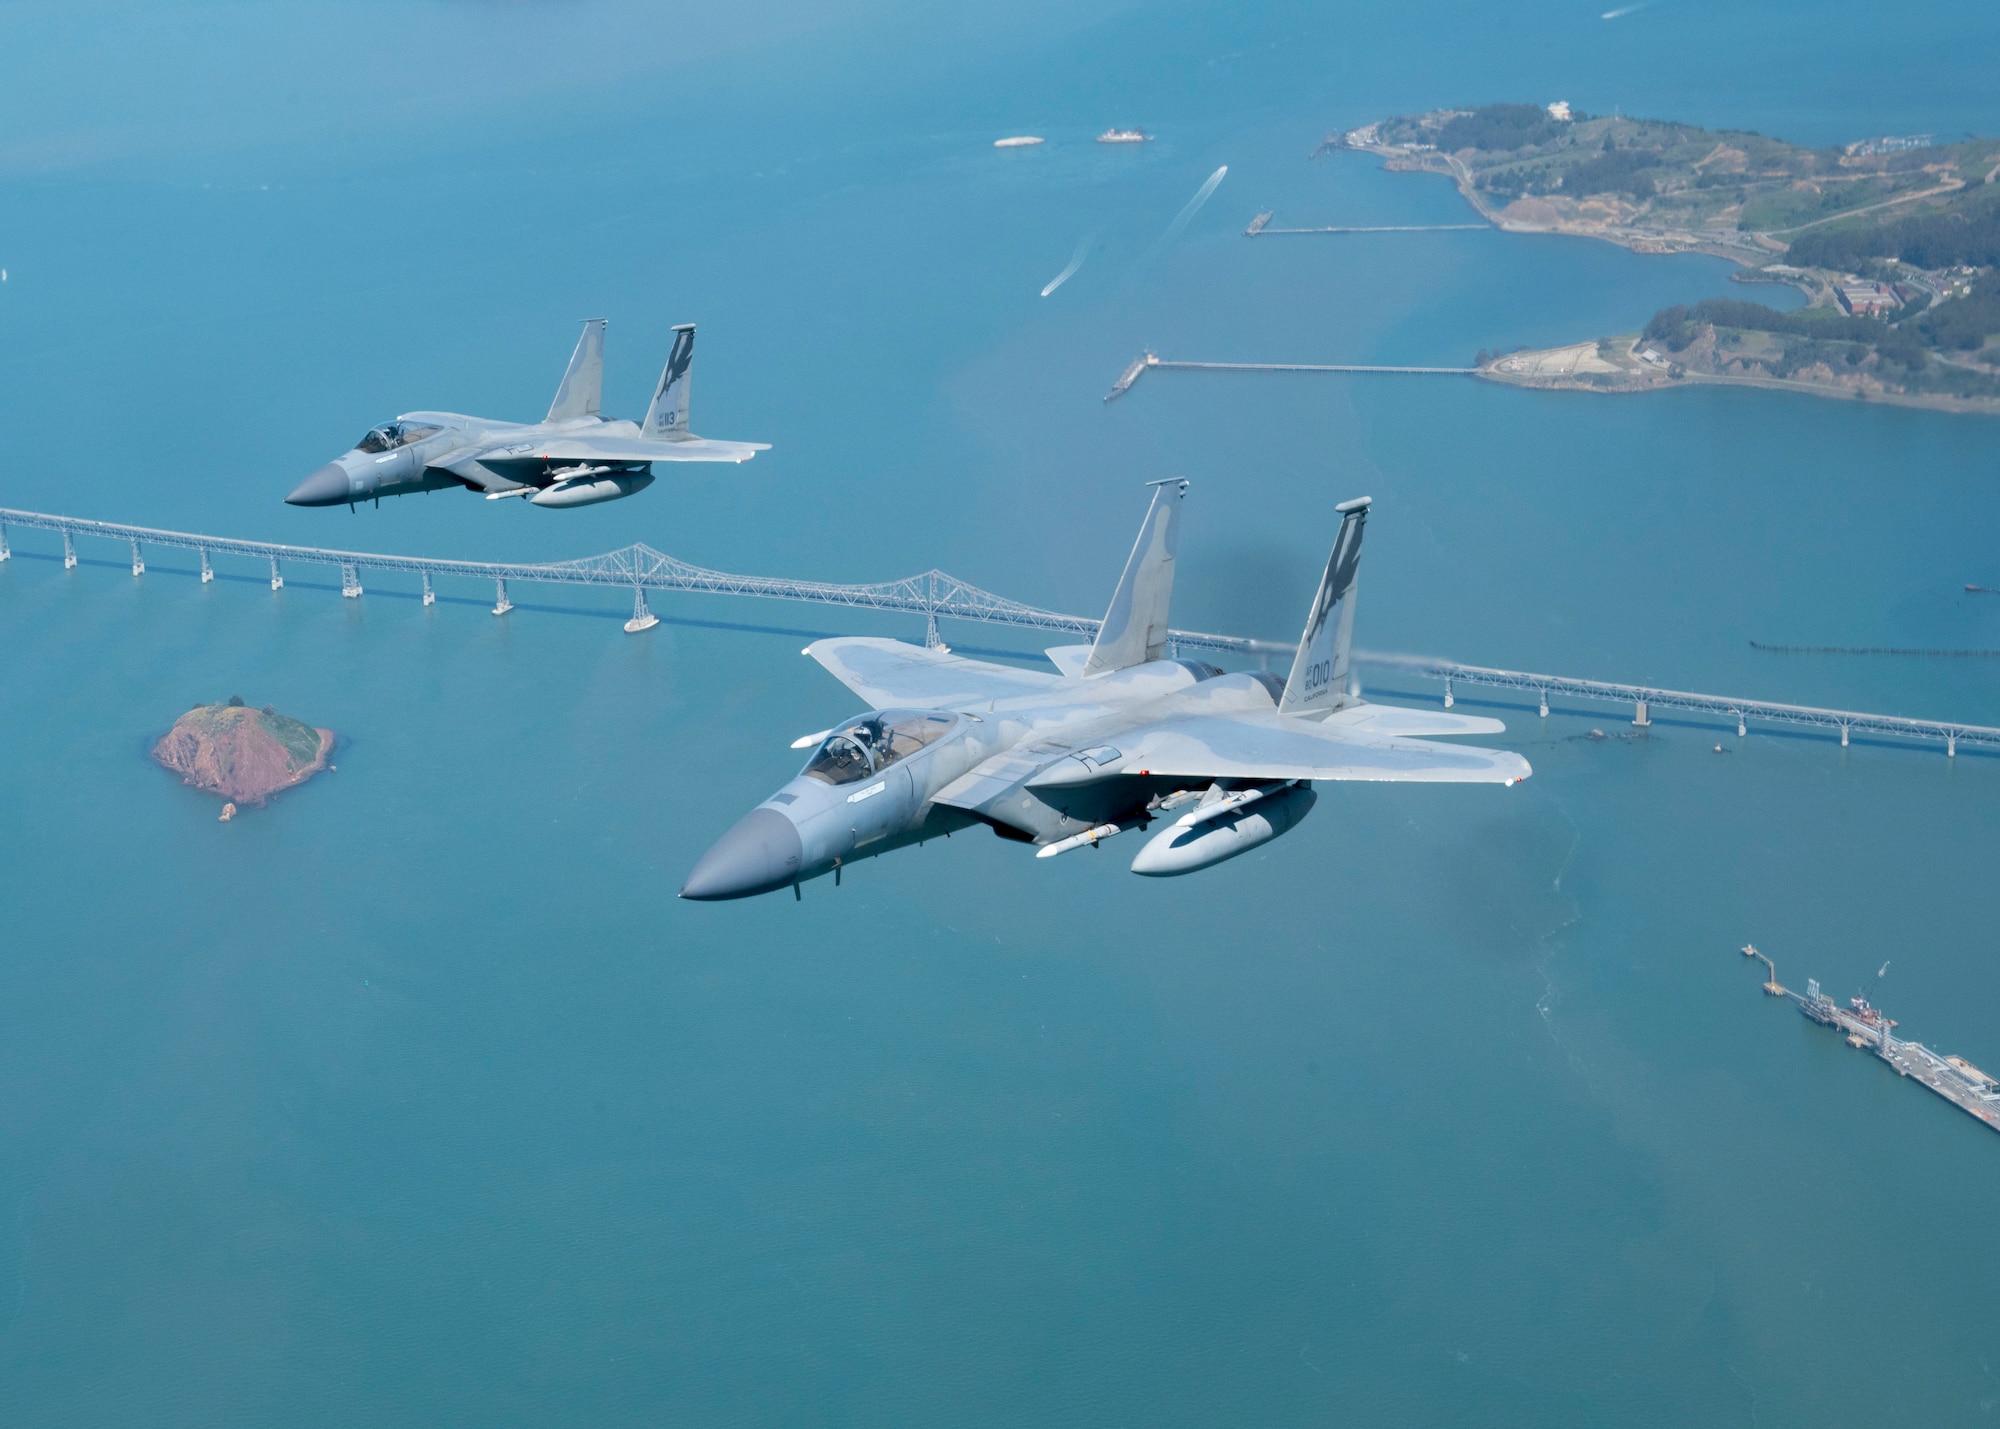 NORAD F-15 jet fighters flew simultaneously off both U.S coasts for Exercise Noble Defender April 6. Noble Defender simulated air defense of ports in the southeast and southwest.